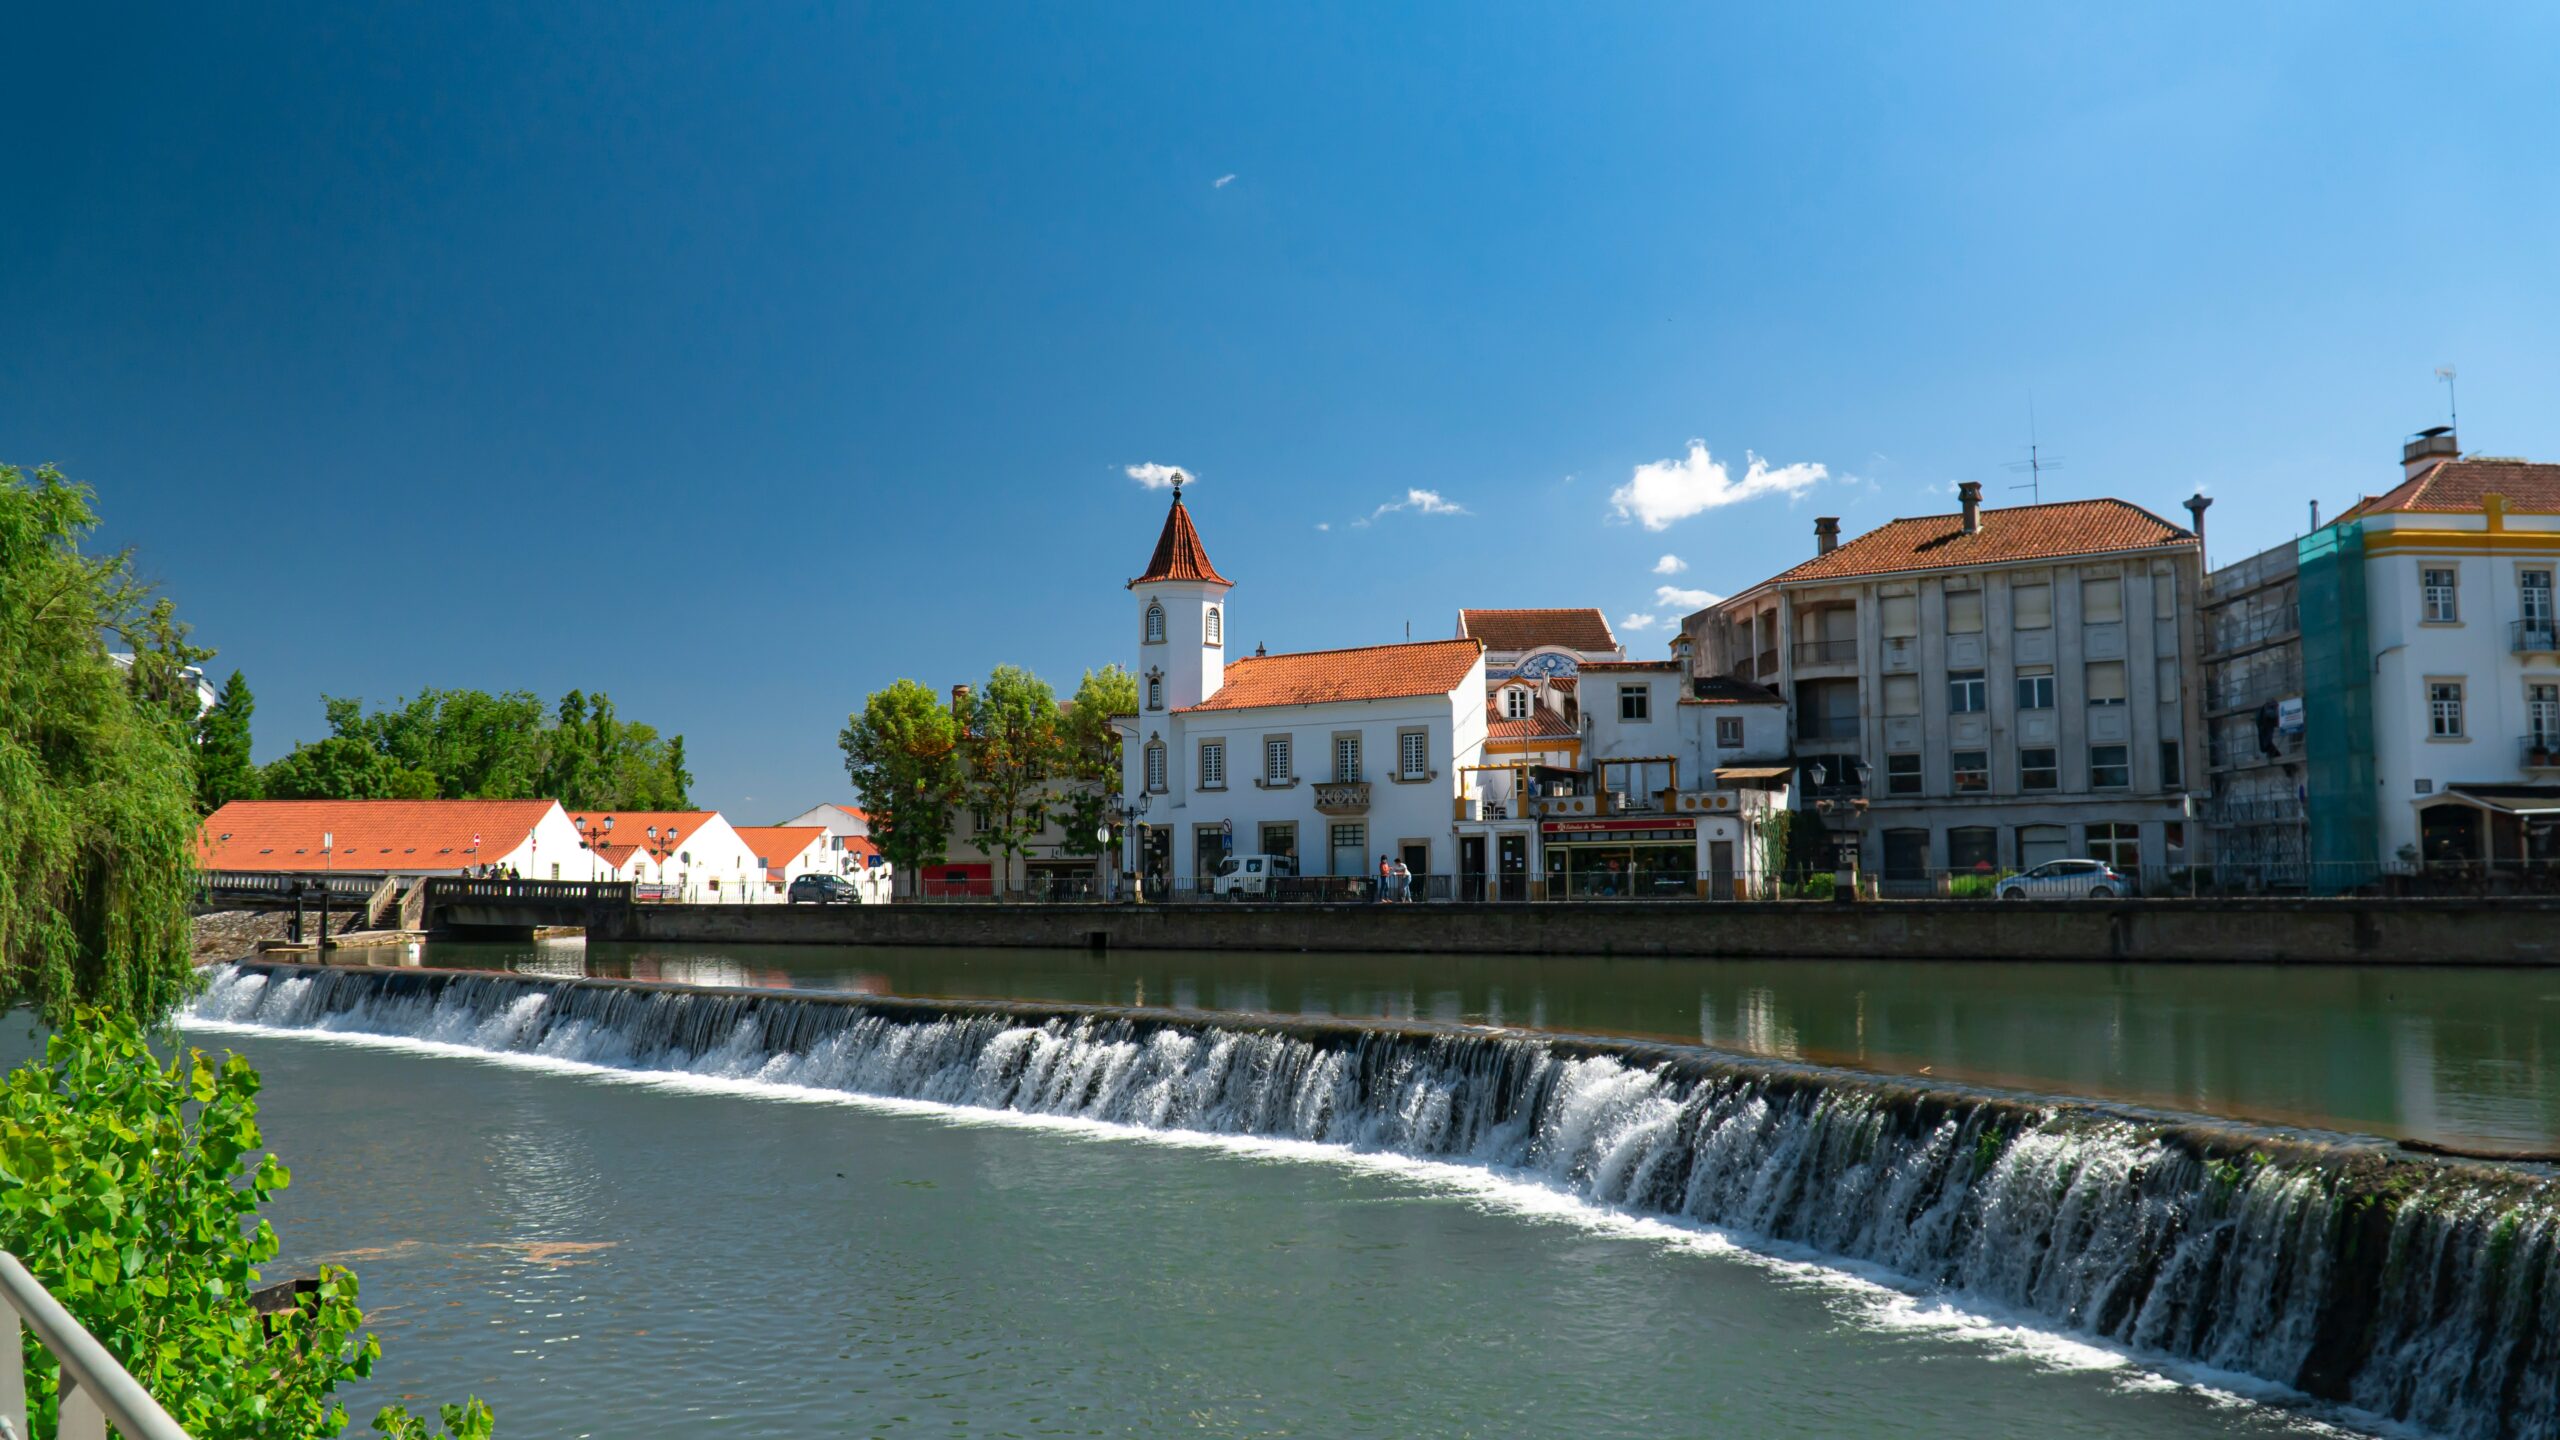 Tomar, Portugal is a filming location for the film "Damsel" that added authentic touches. 
pictured: a rushing water feature outside of the town Tomar, Portugal